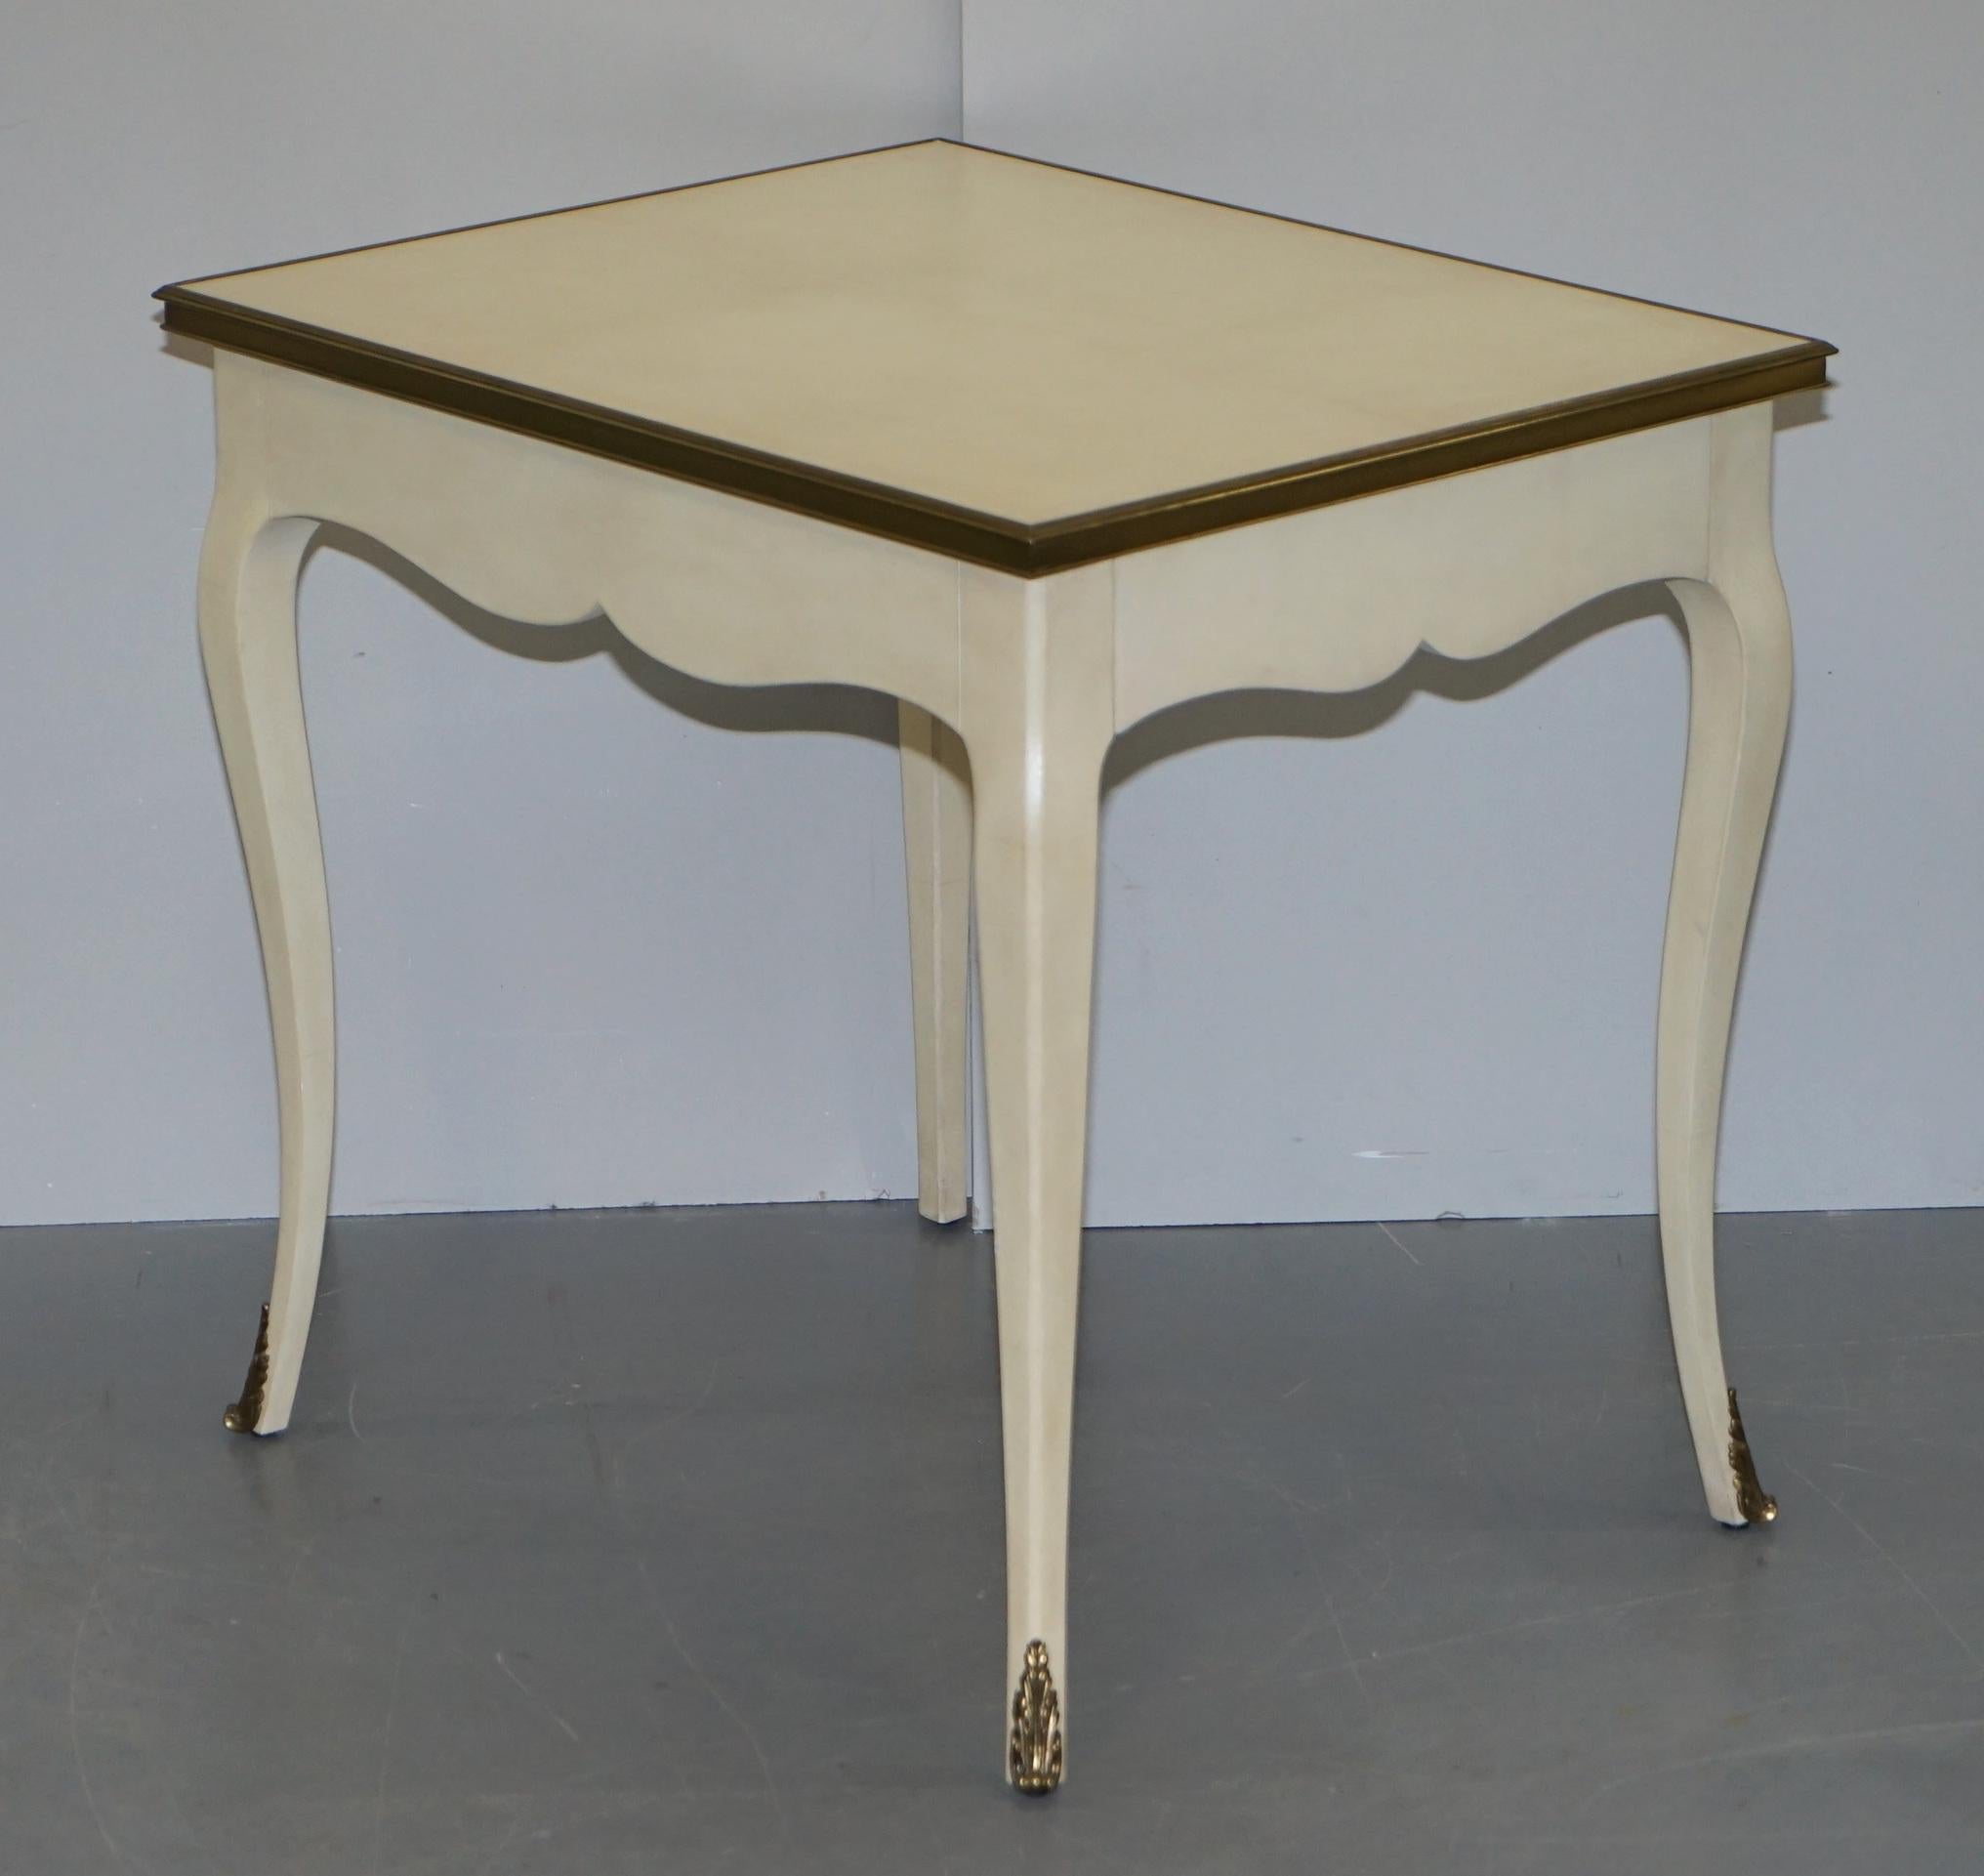 We are delighted to offer for sale this stunning pair of near perfect condition Ralph Lauren Cannes French side tables with single drawers and brass detailing 

These tables are part of a suite, I have the matching desk and chair, I also have the